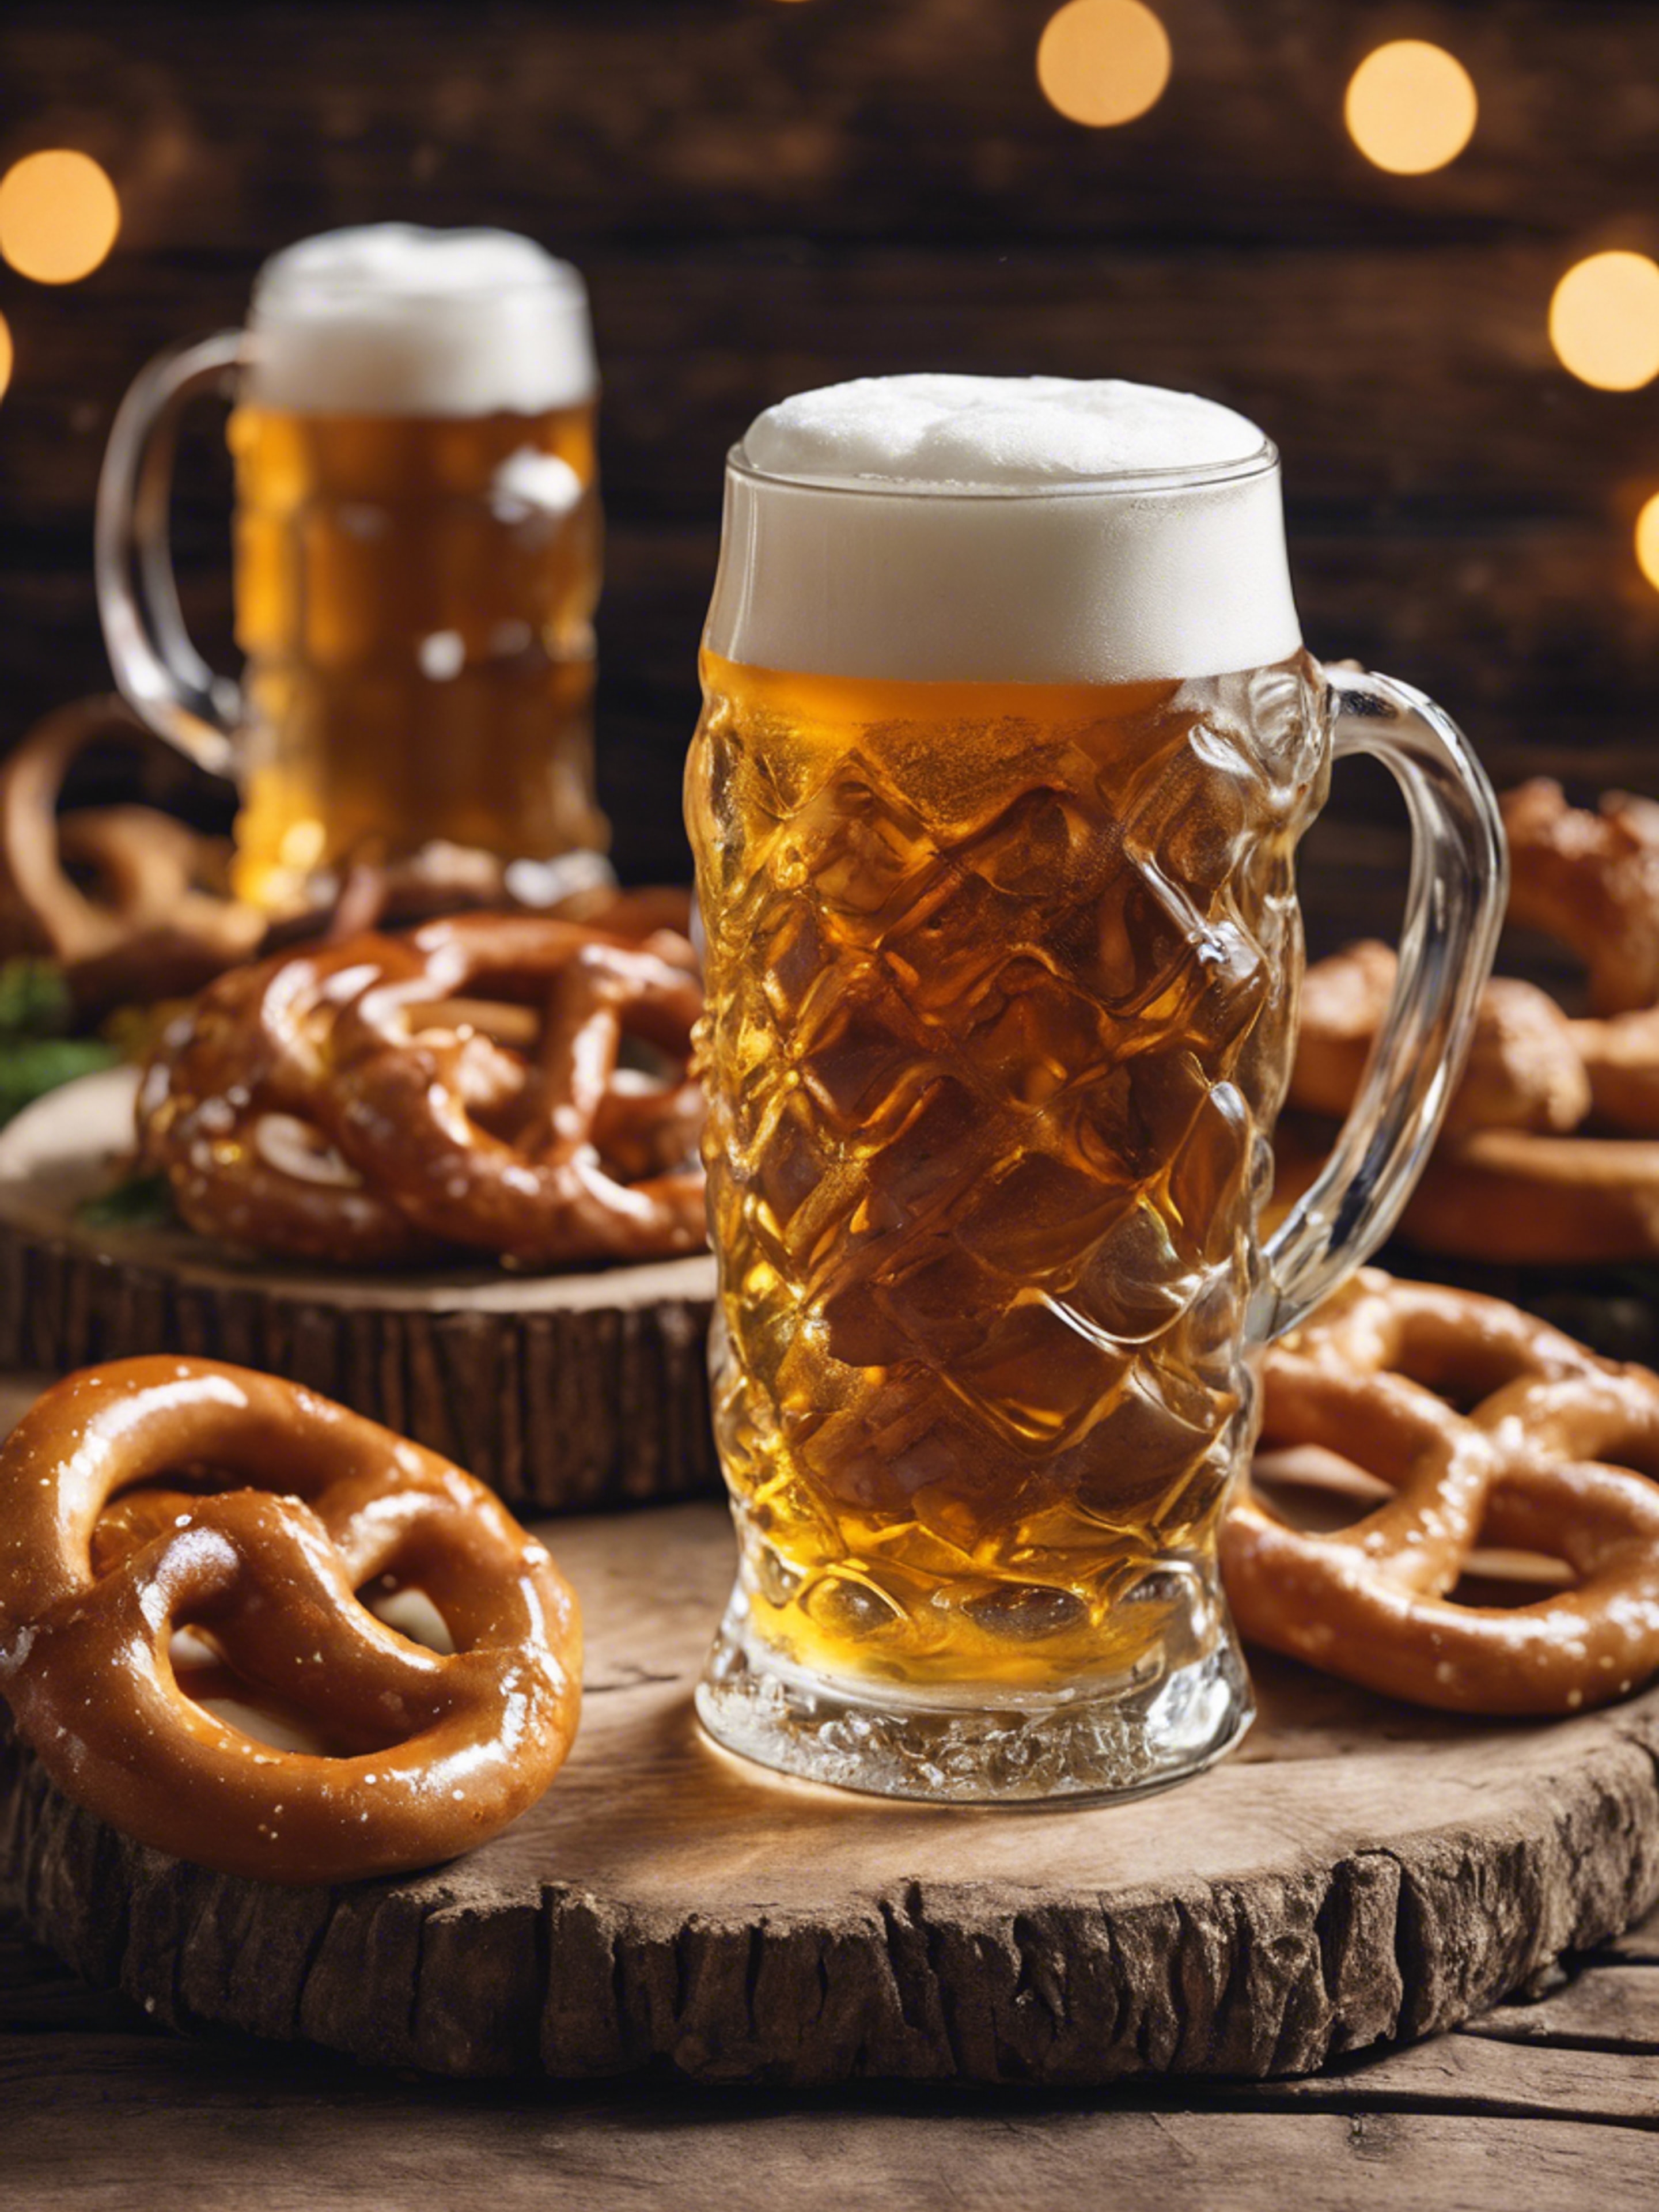 A foamy German beer, pretzels, and other Oktoberfest traditional foods on a rustic wooden table. ផ្ទាំង​រូបភាព[8867ca72213c4237bd6d]